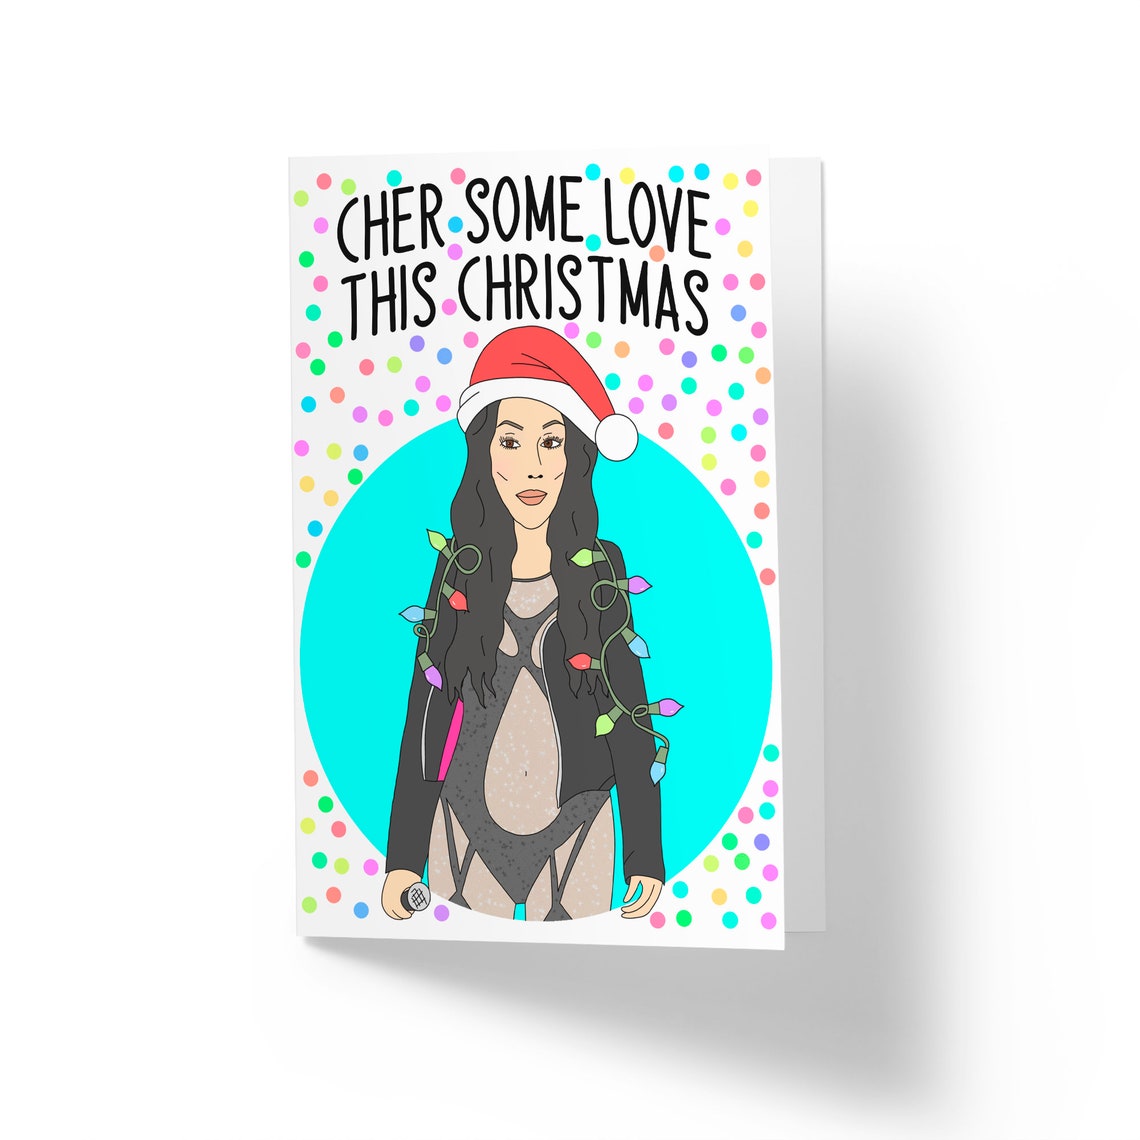 Cher Christmas Card Cher Some Love This Christmas | Etsy